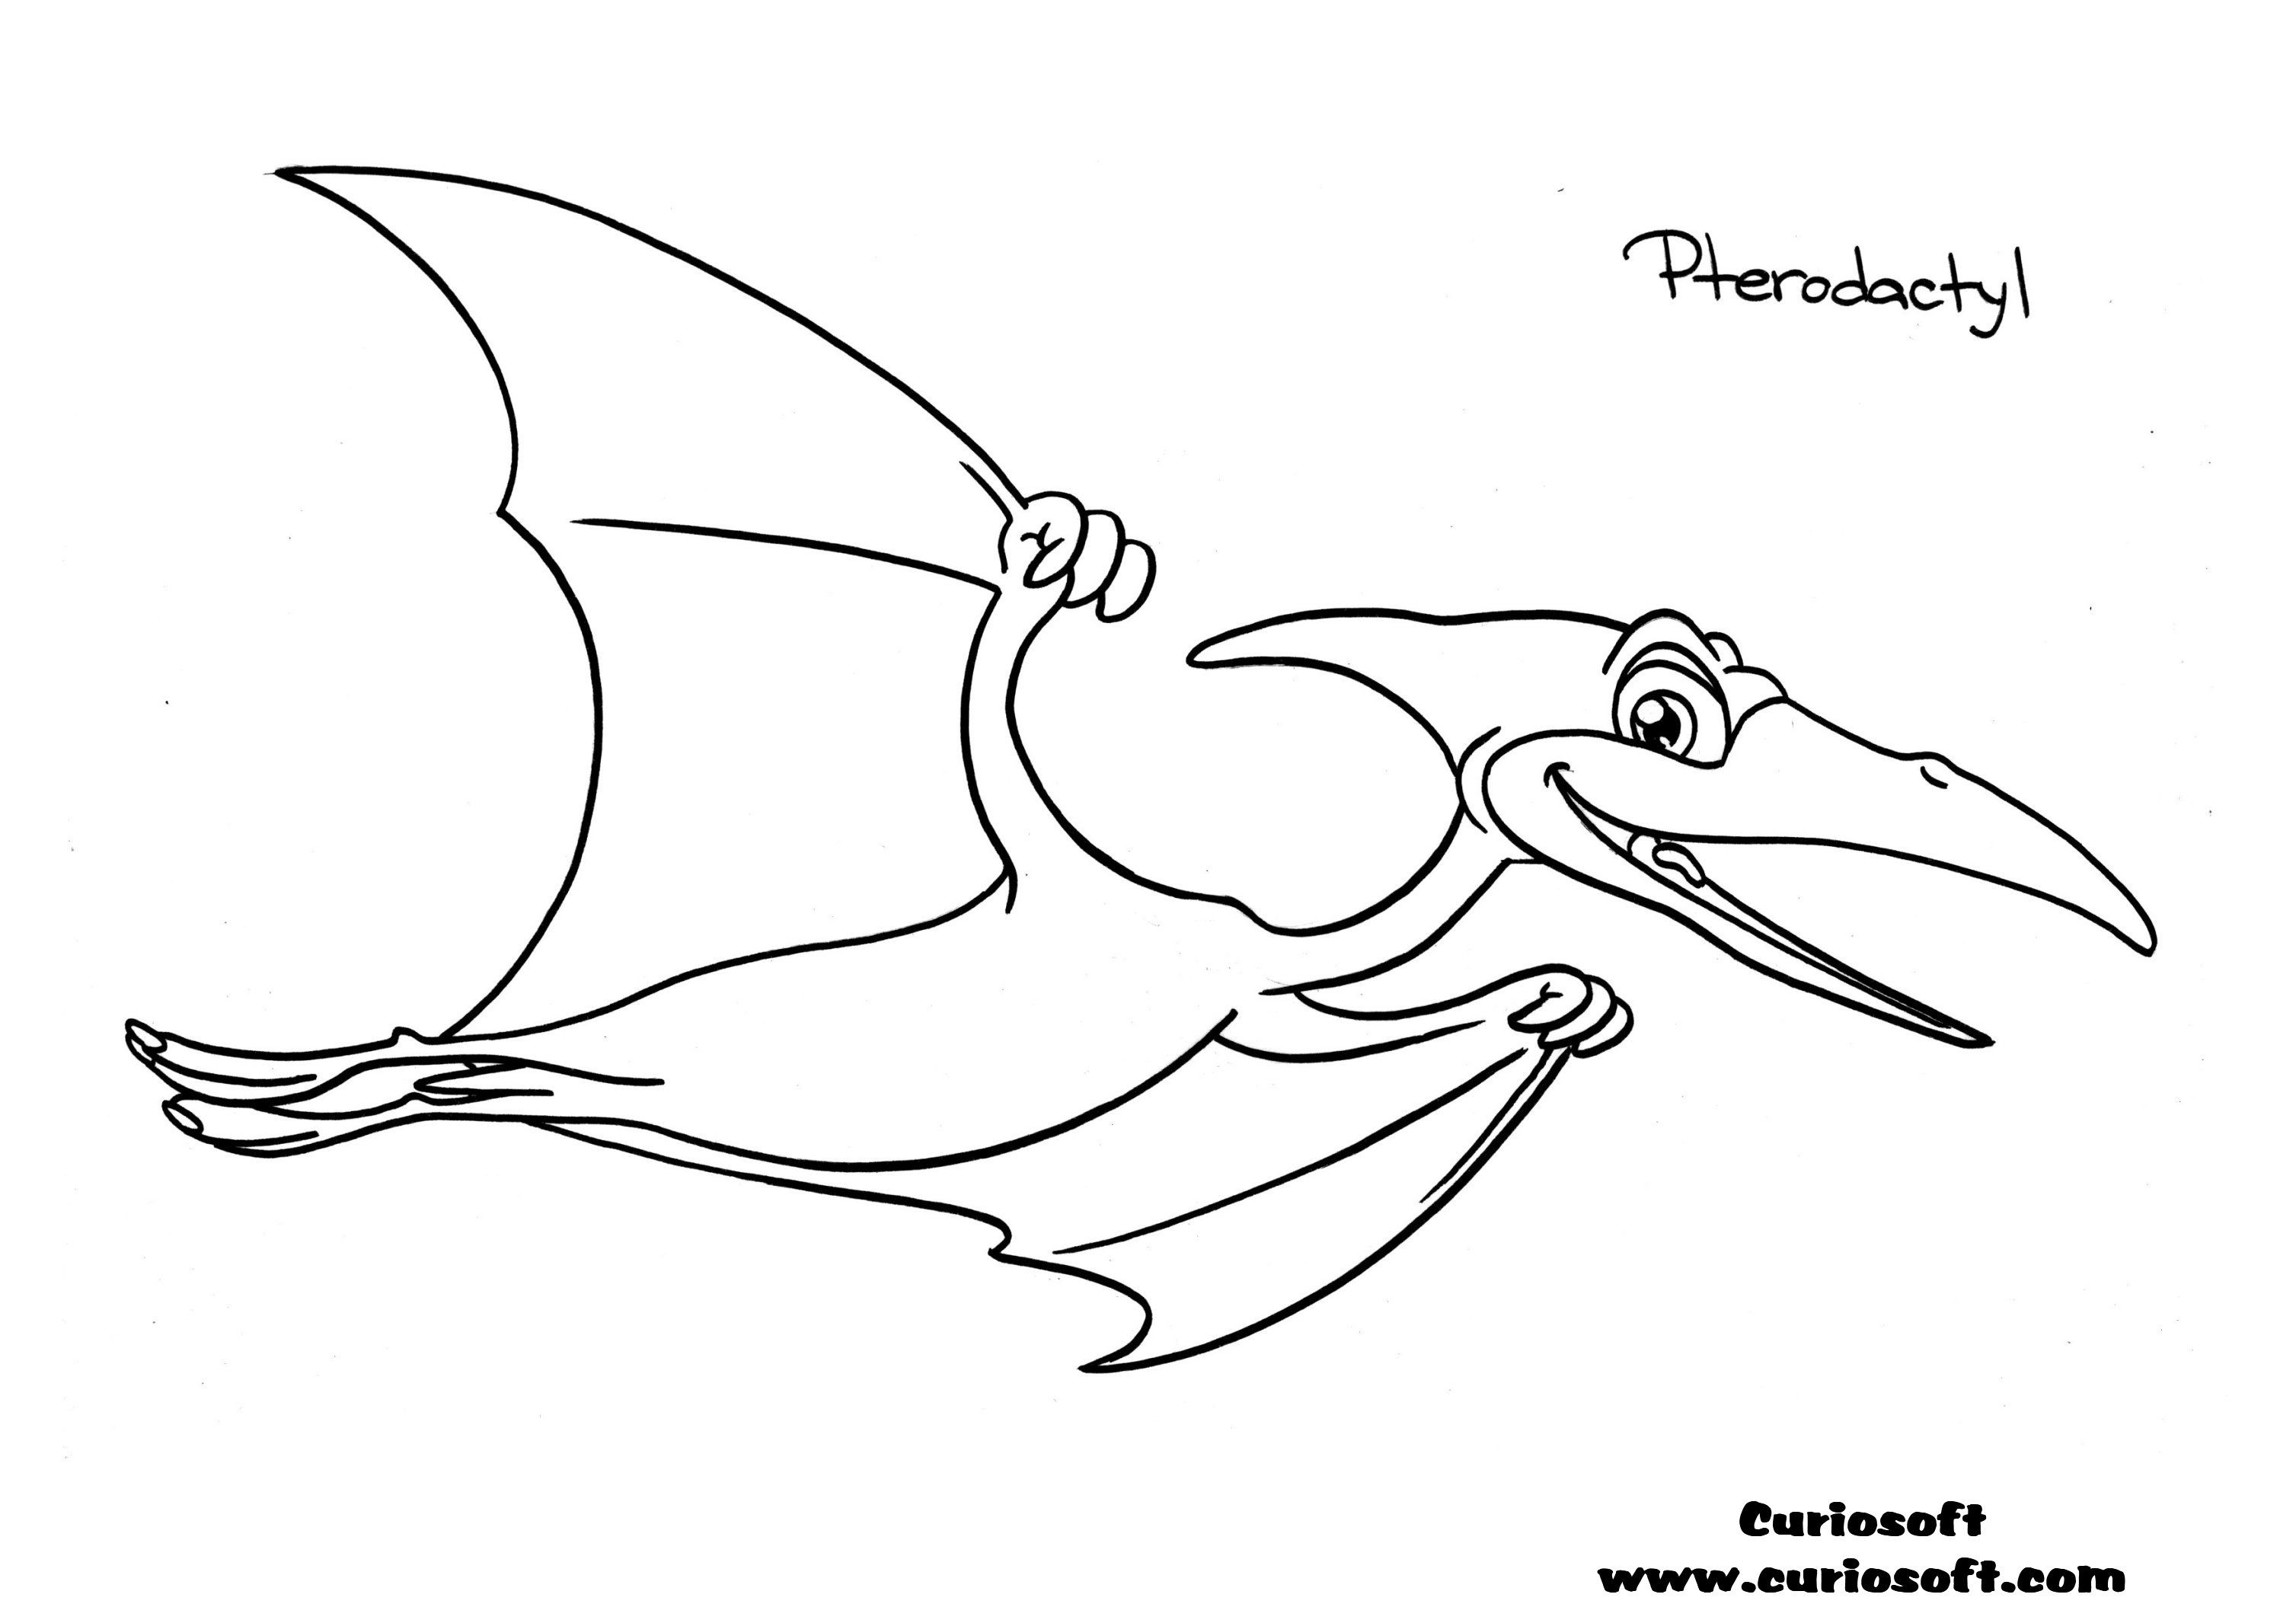 Pterodactyl dinosaur coloring pages dinosaur coloring coloring pages